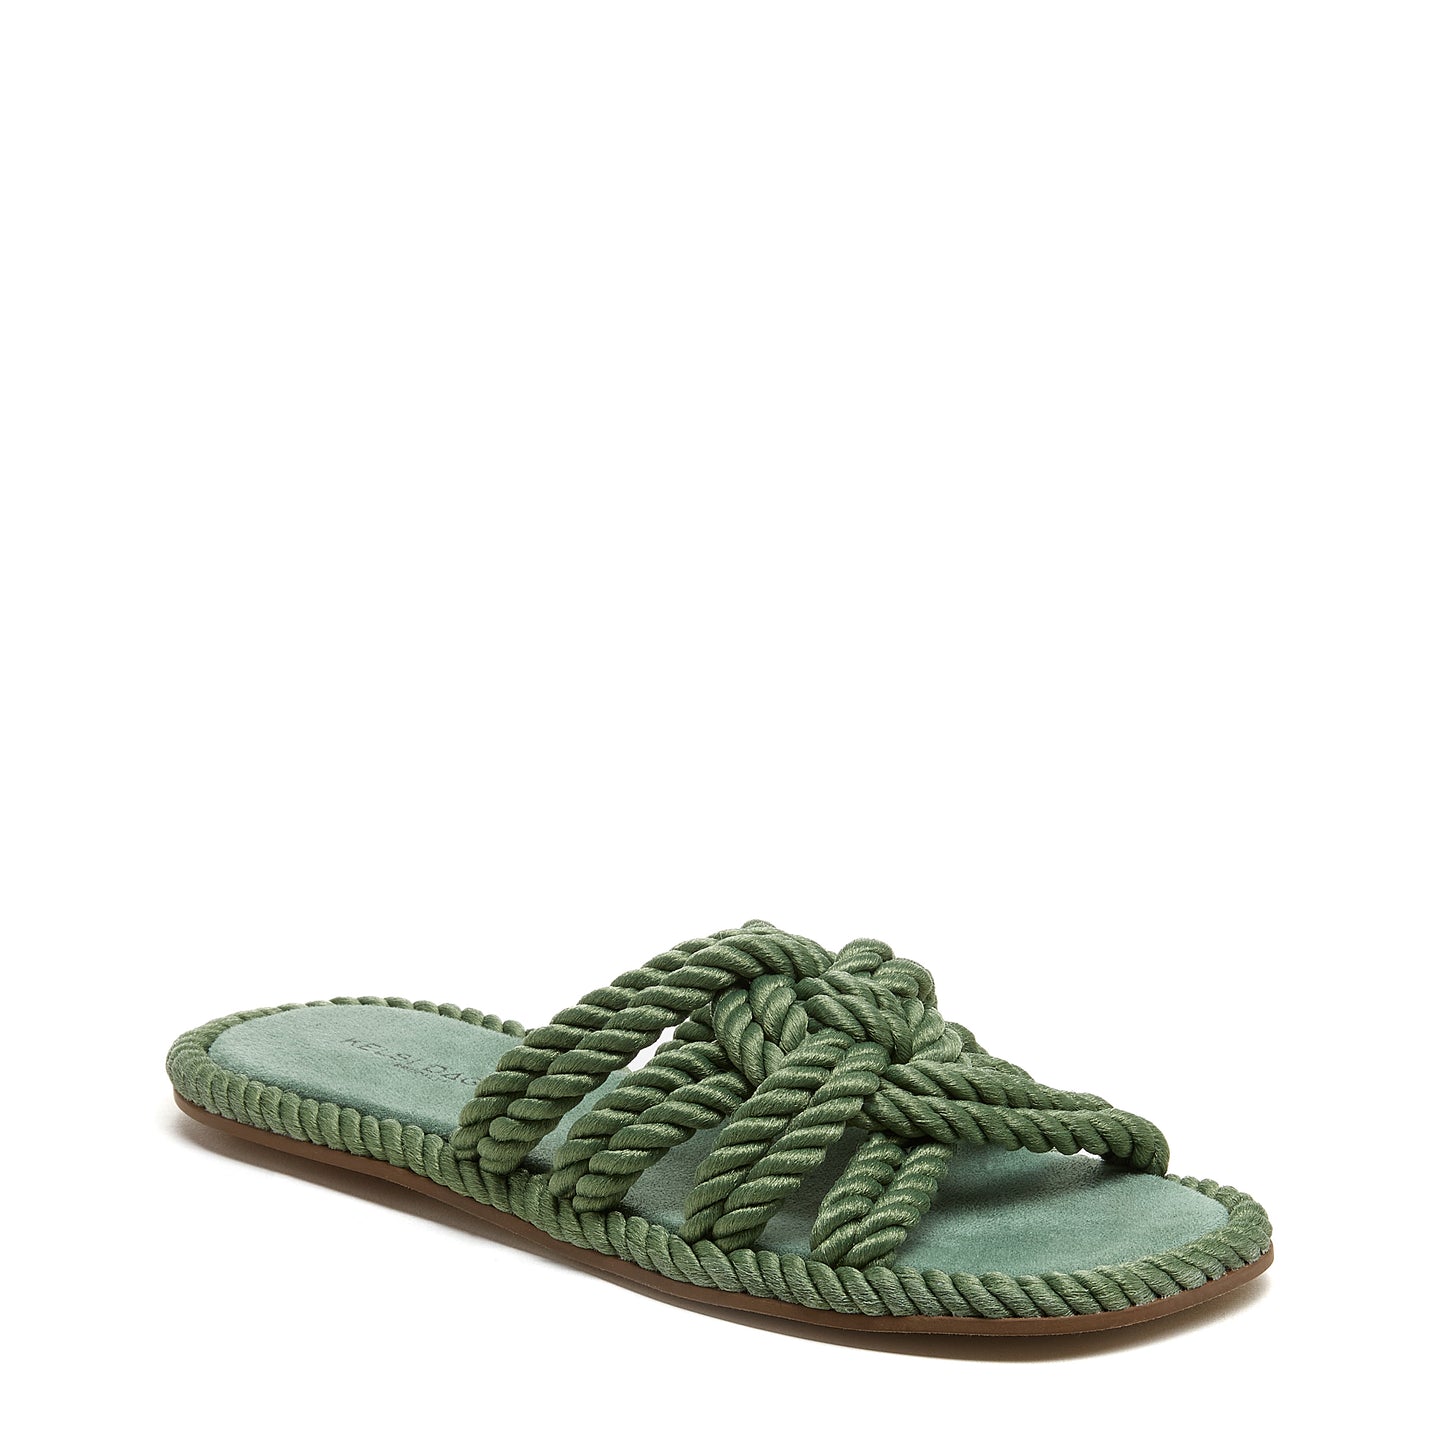 Beachy Moss Rope Woven Sandals